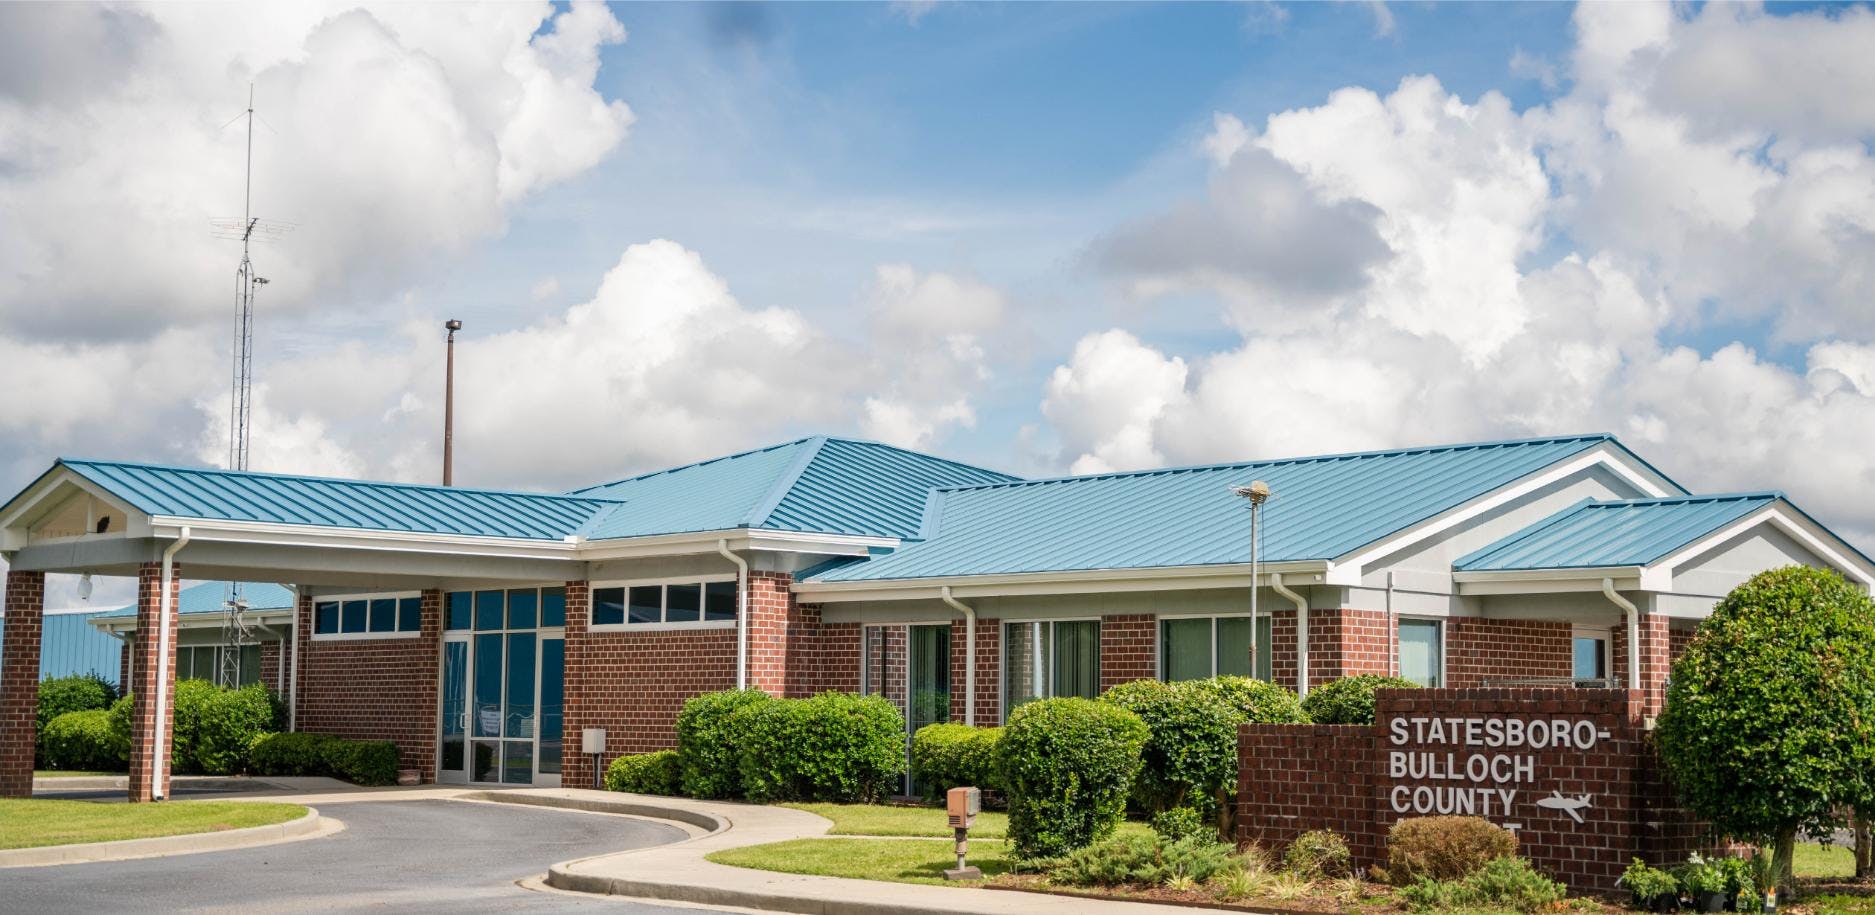 Statesboro-Bulloch County Airport | Commercial Roof Replacement | Bulloch County Commercial Roofers | Standing Seam Metal Roofing | Blue Roof | Commercial Metal Roof